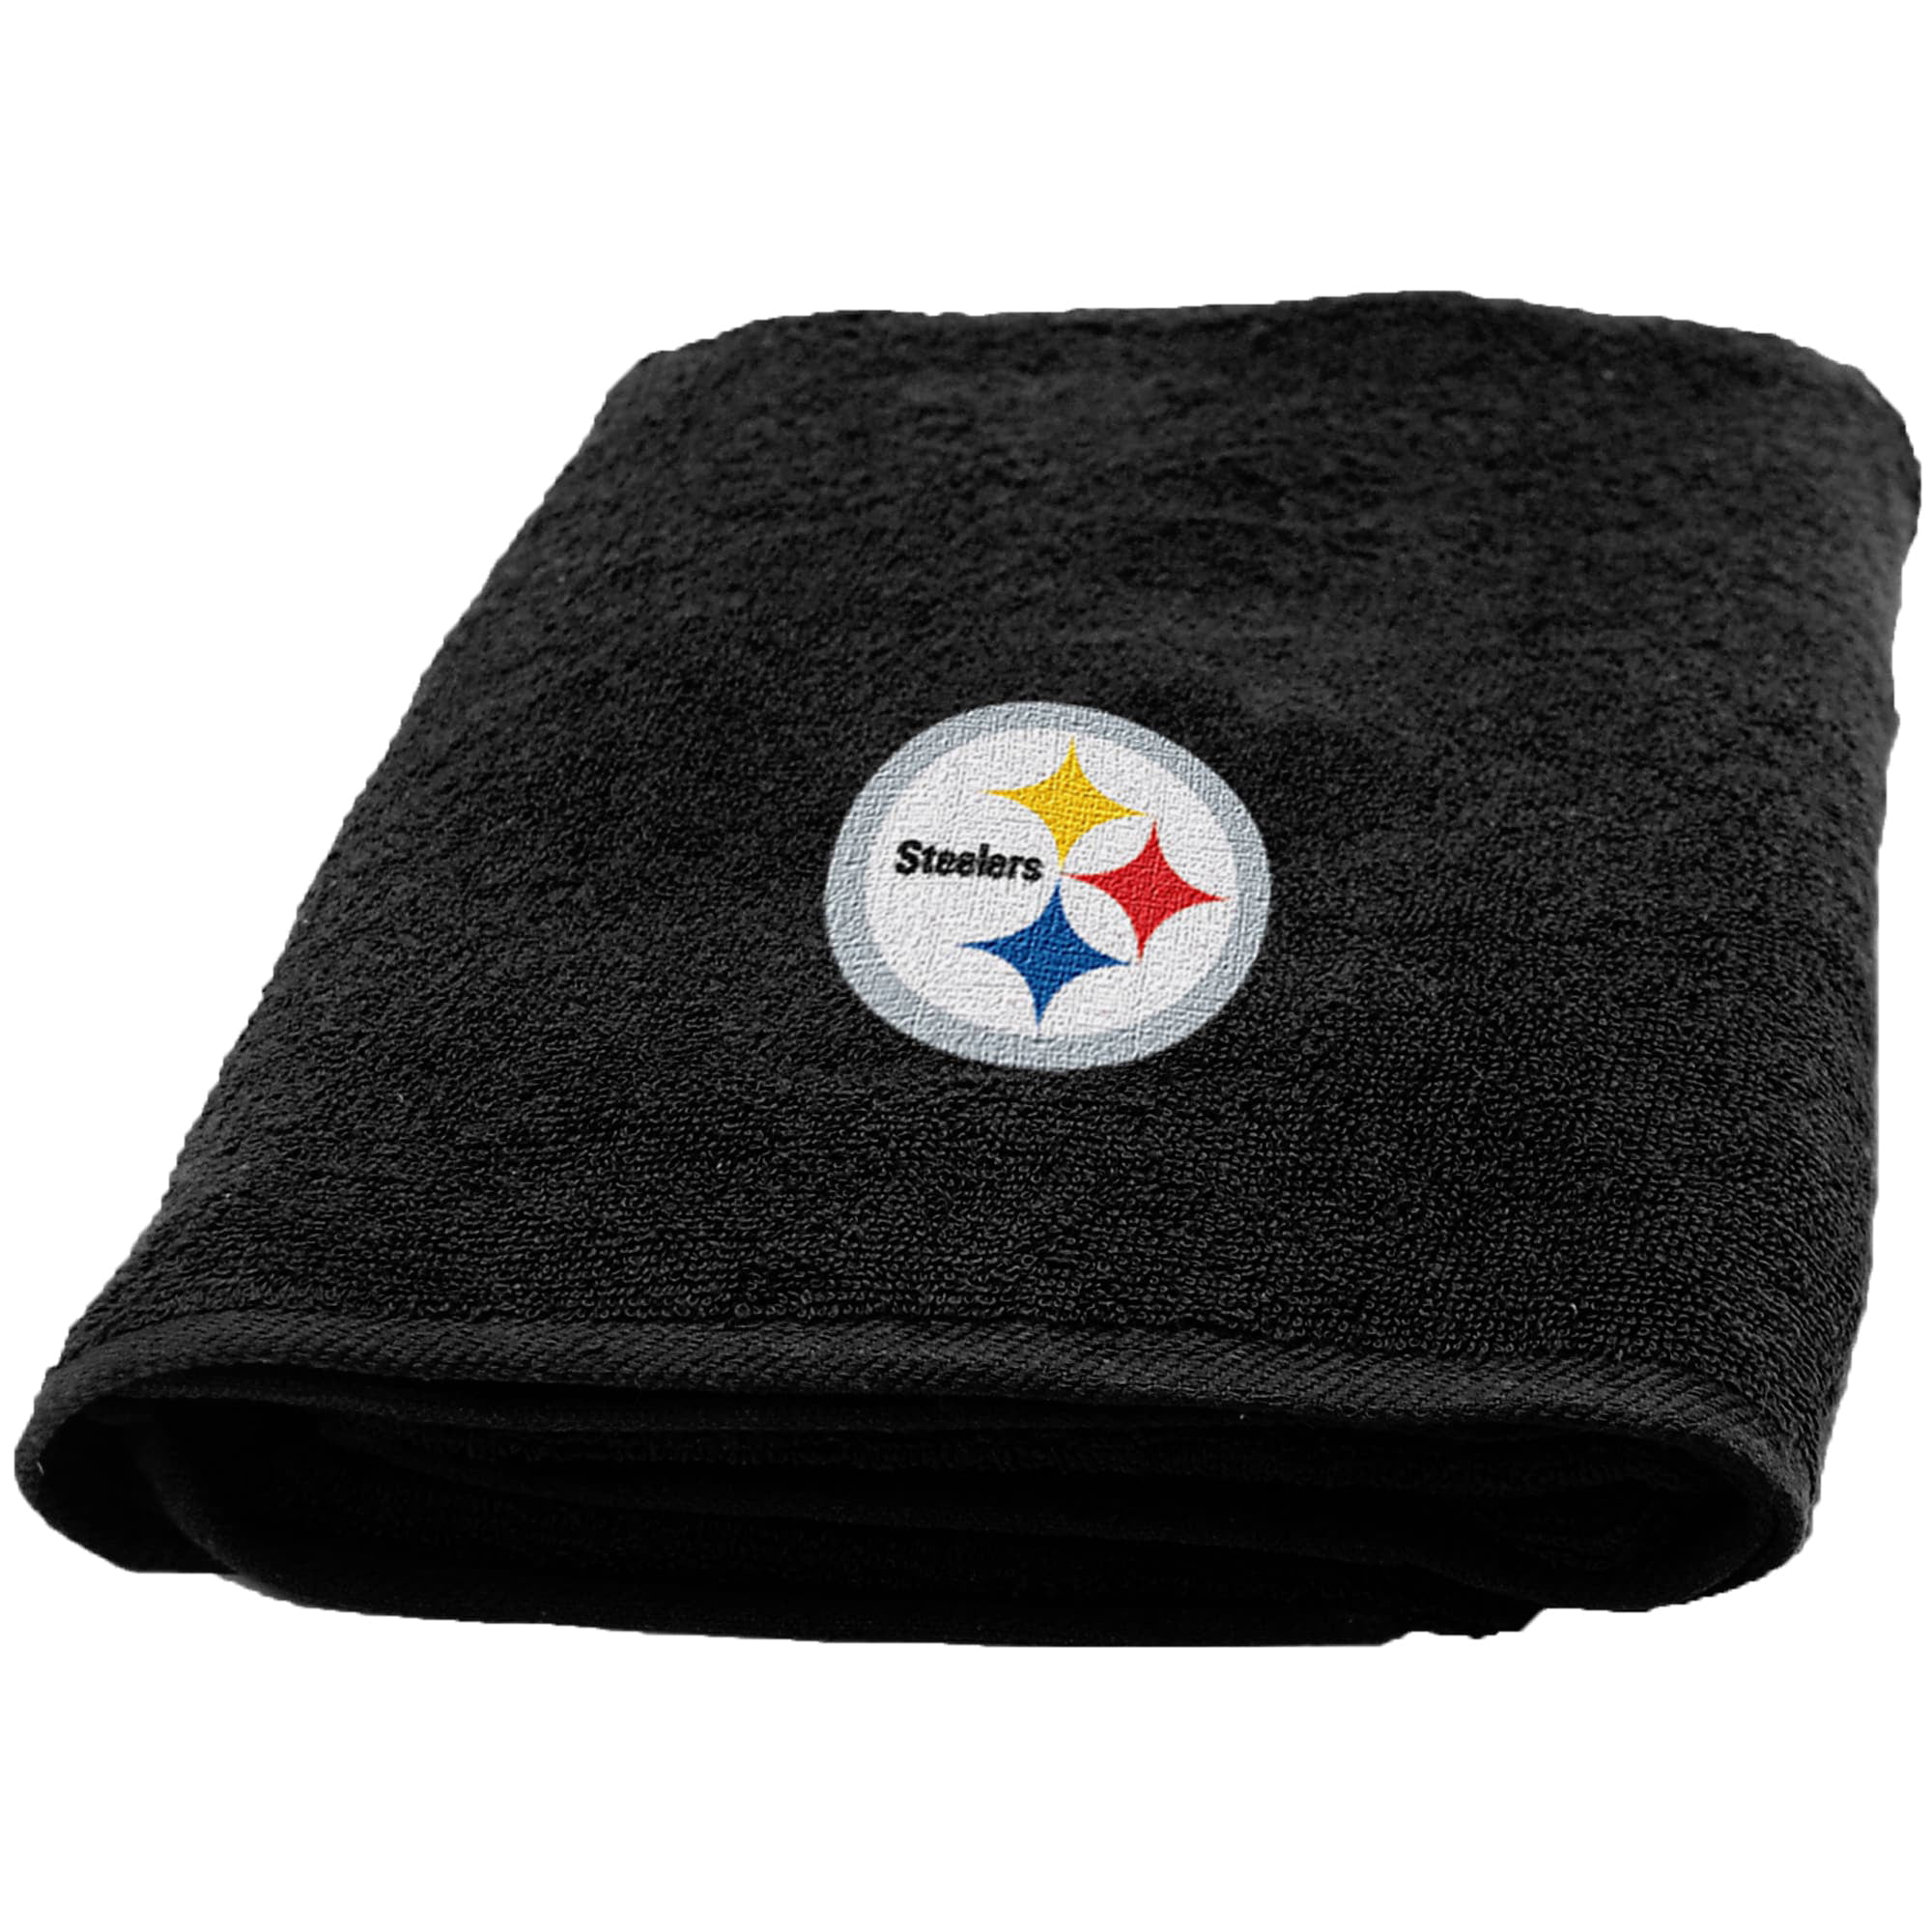 Steelers Personalized 3 Piece Bath Towel Set Football Your Team & Color Choice 